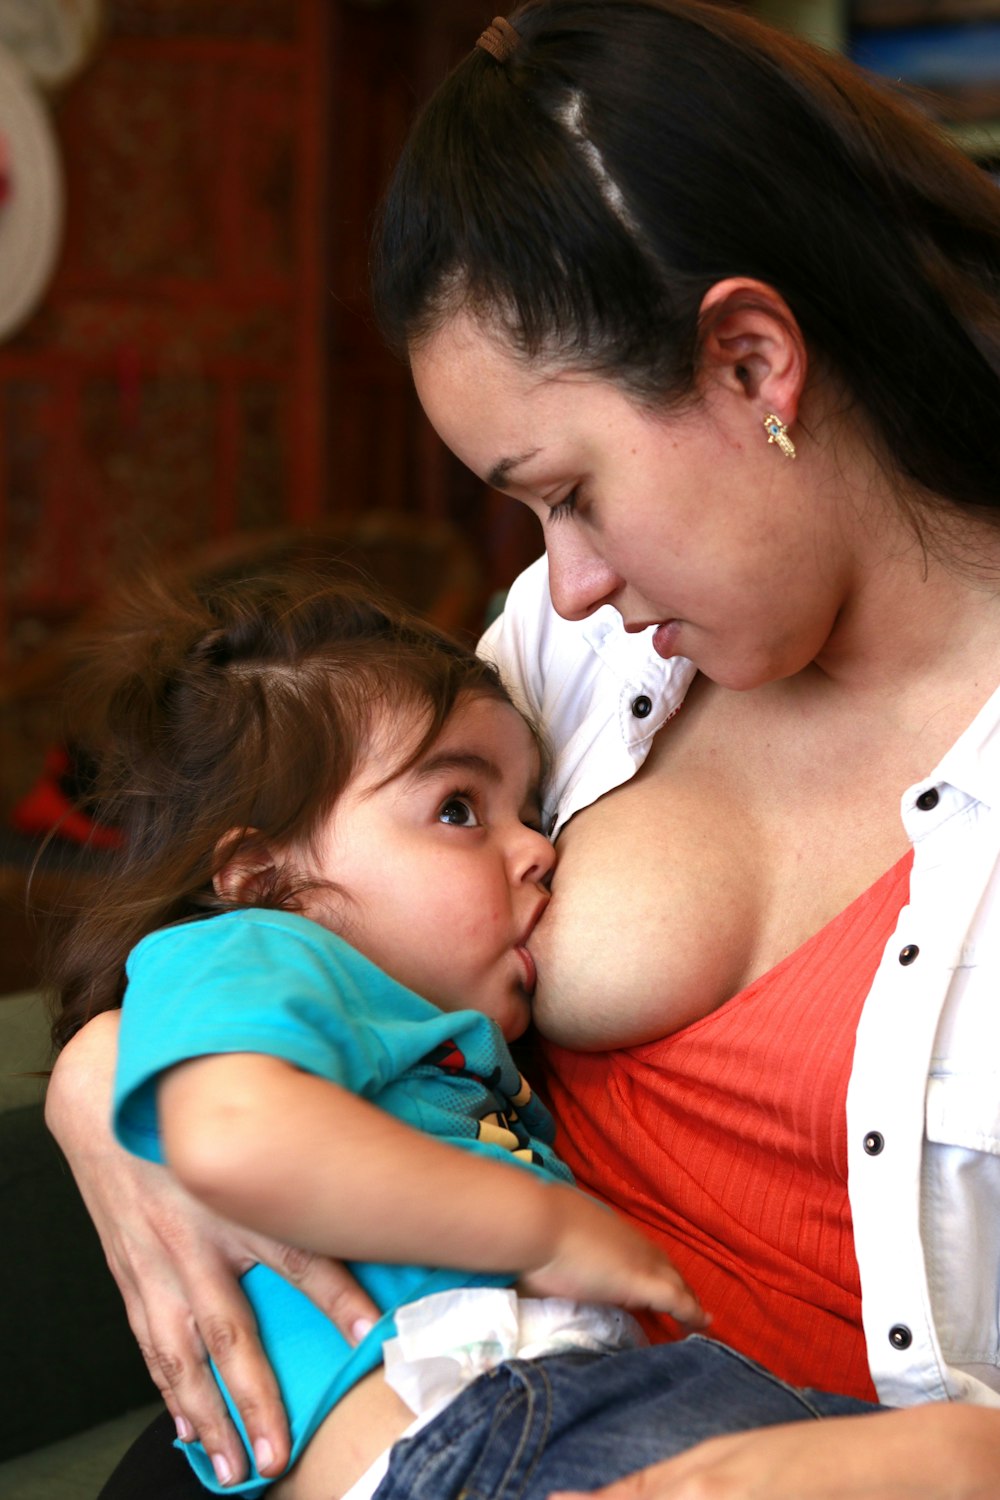 woman breastfeed the baby